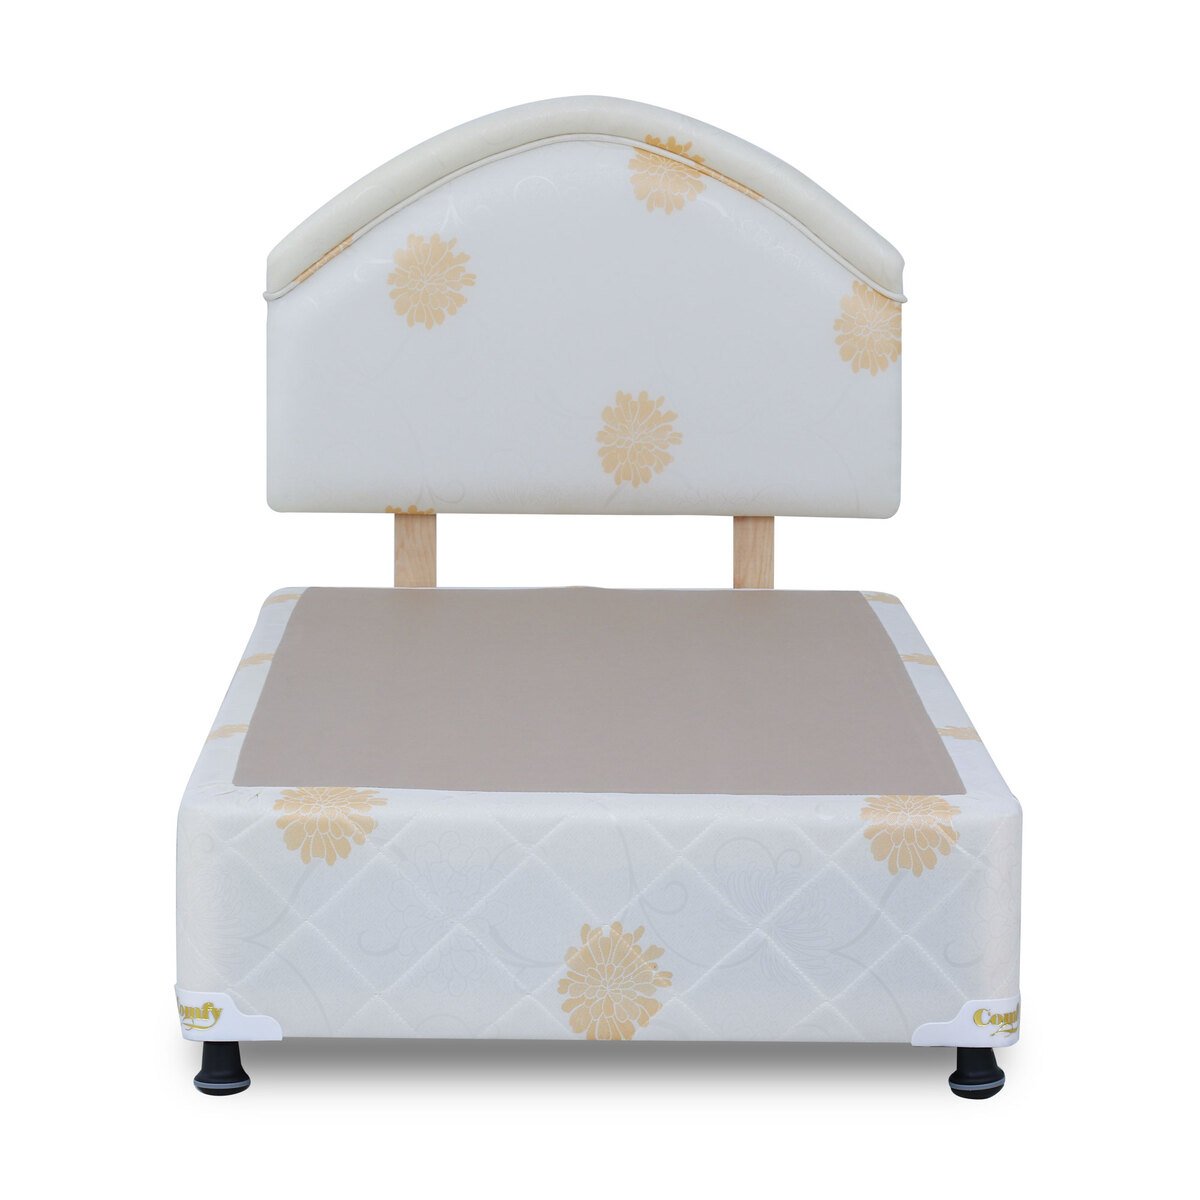 Design Plus Divan Base With Medicated Mattress 190x90 (Headboard with Base)